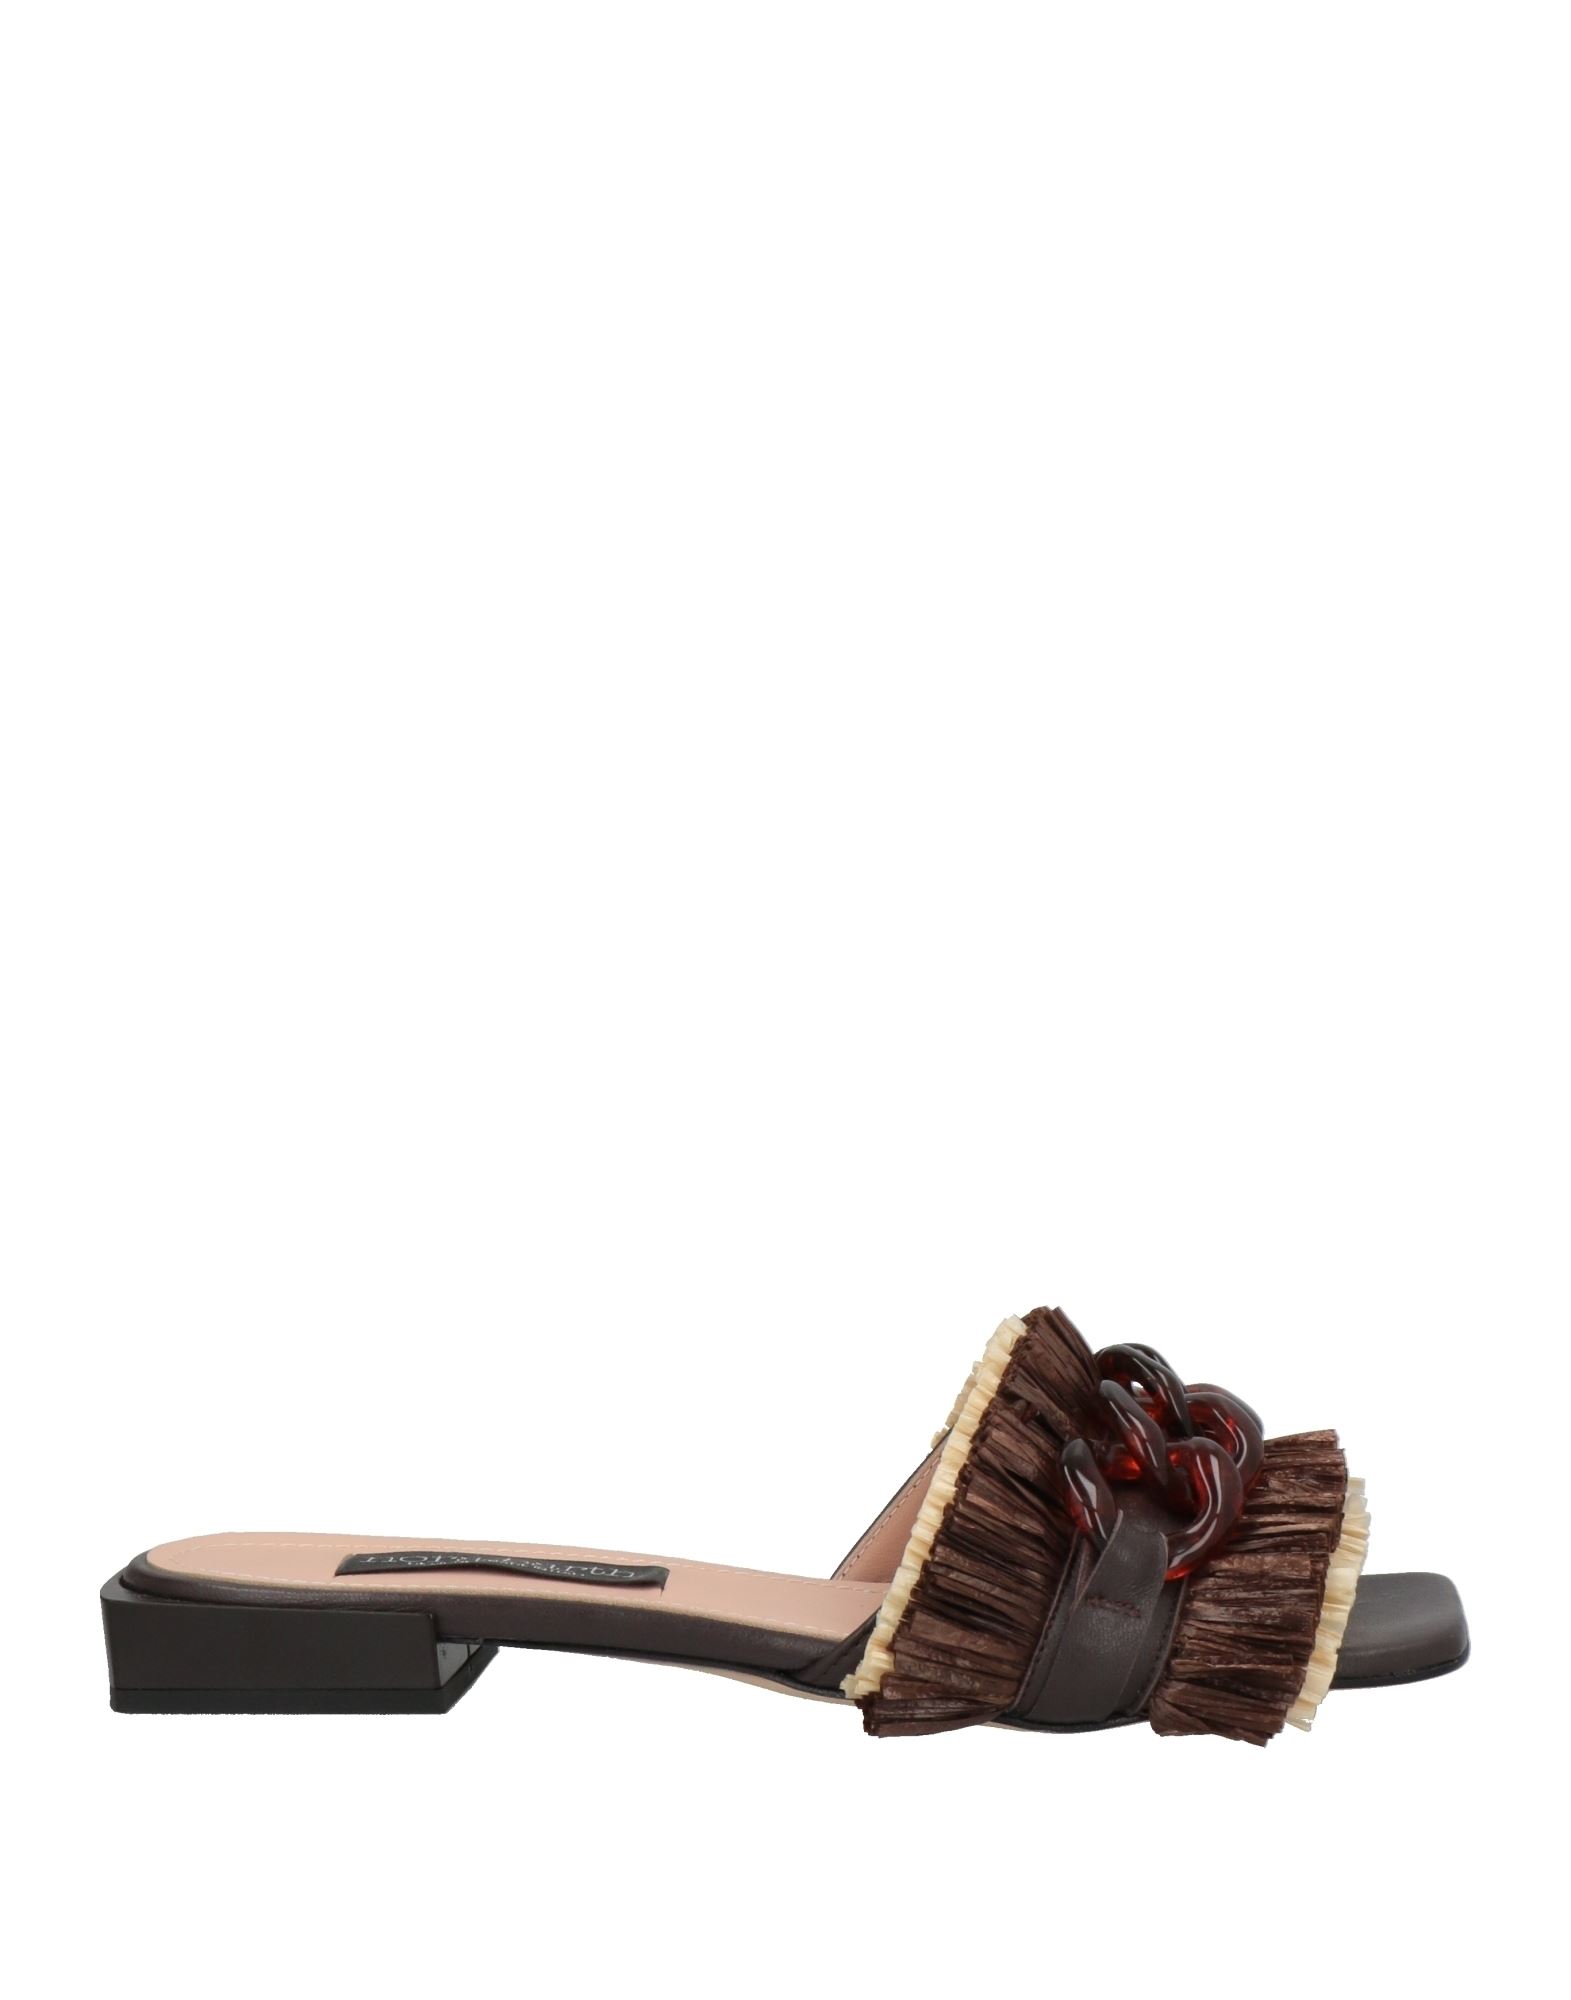 Nora Barth Sandals In Brown